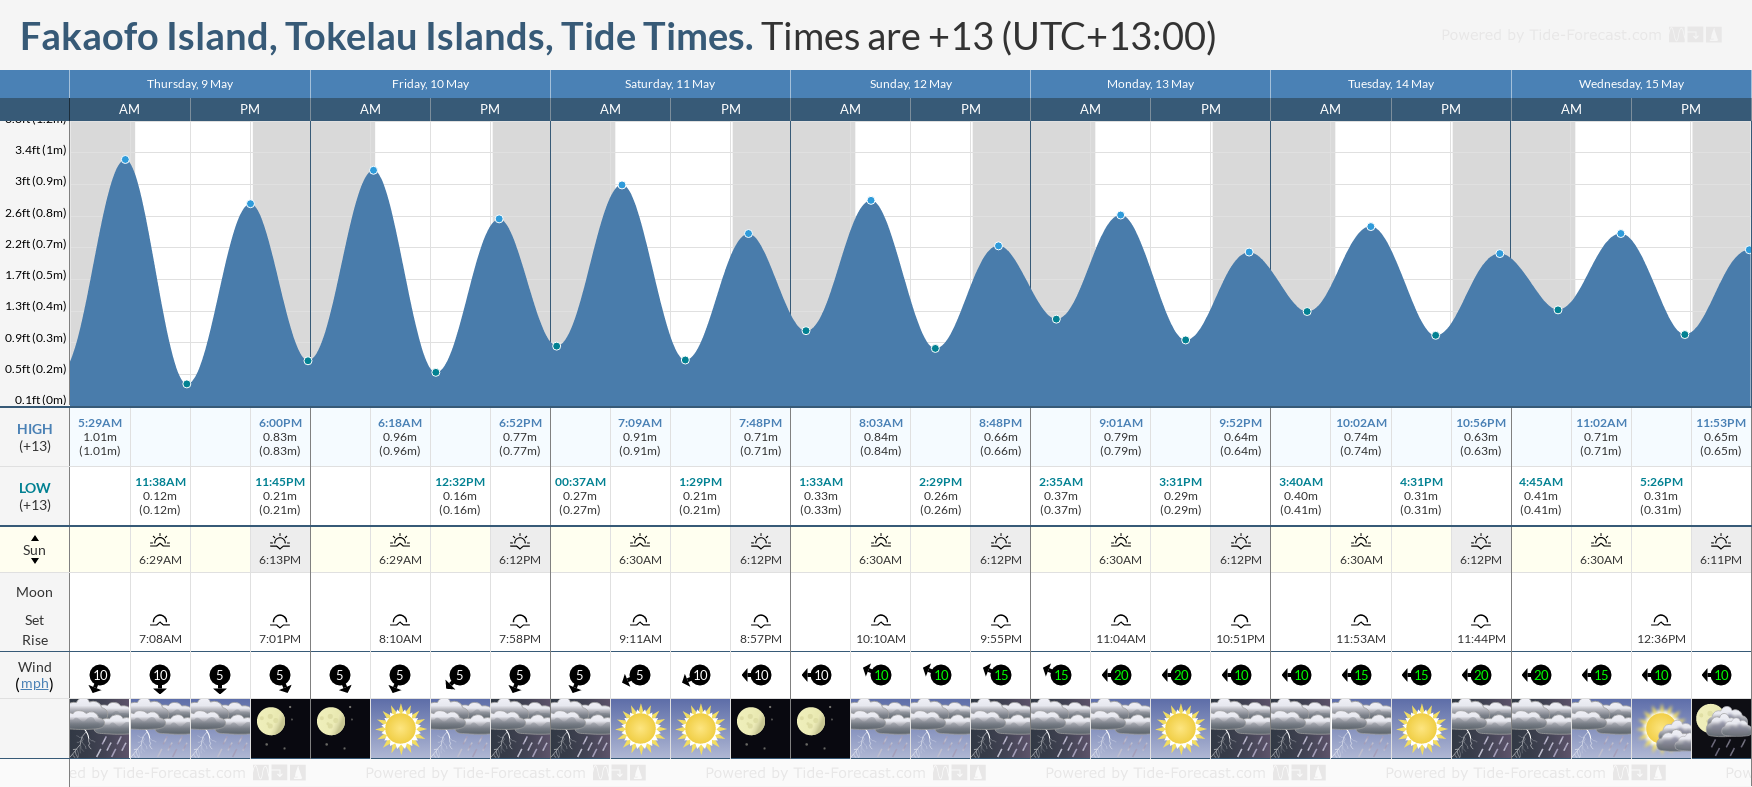 Fakaofo Island, Tokelau Islands Tide Chart including high and low tide tide times for the next 7 days